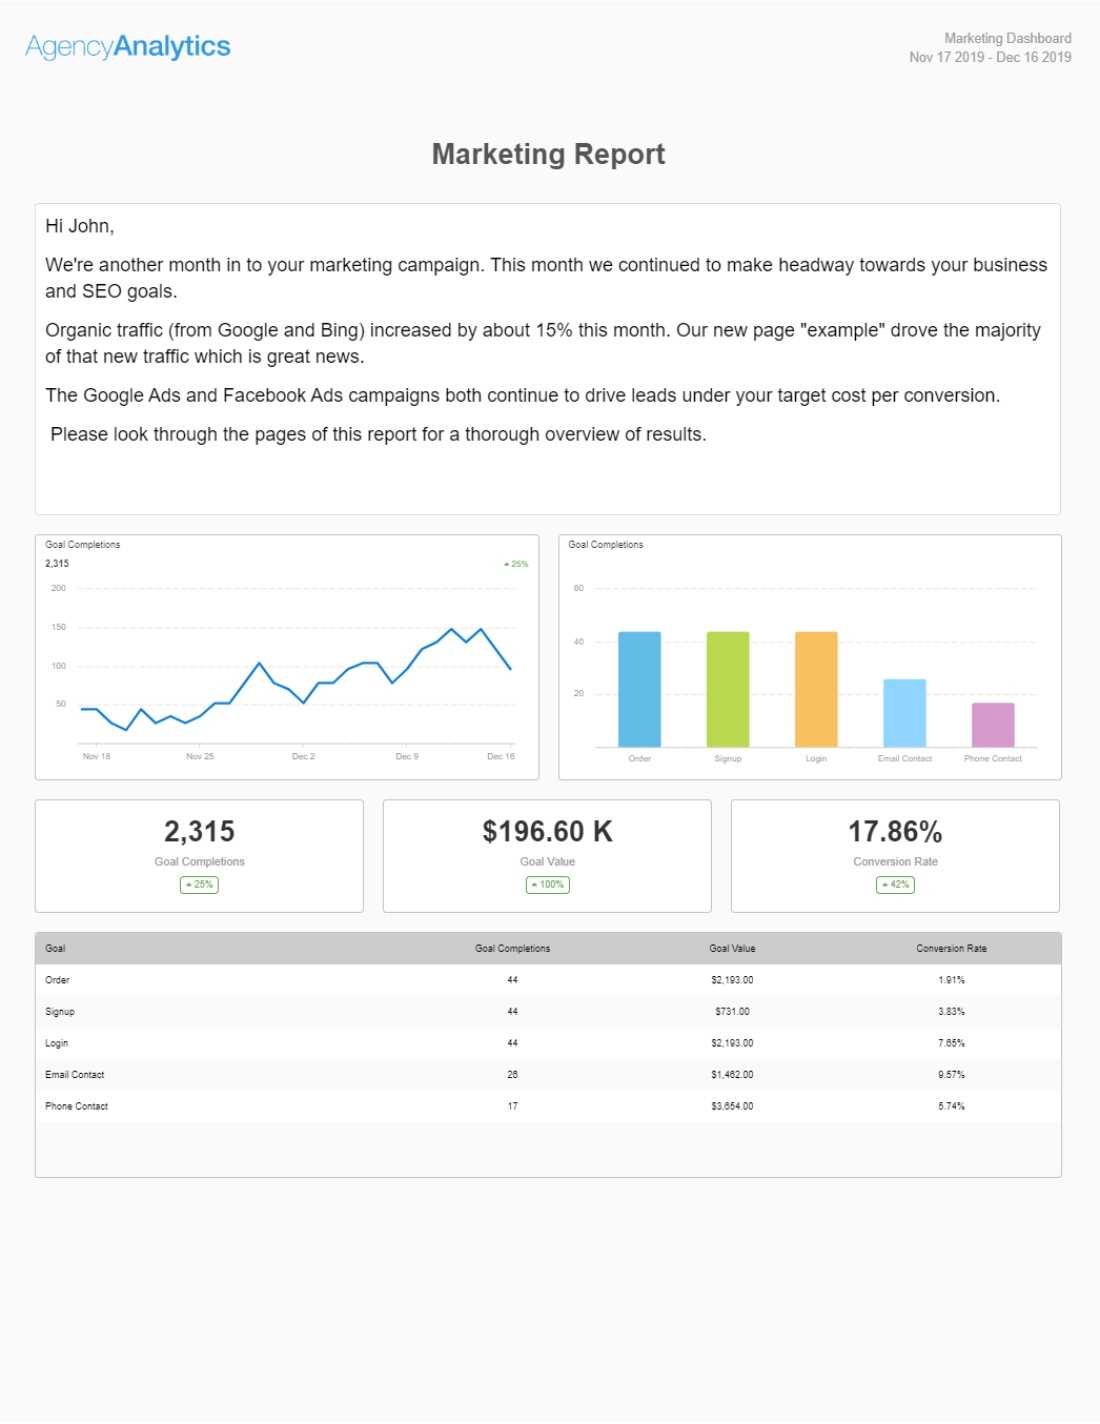 Build A Monthly Marketing Report With Our Template [+ Top 10 Regarding Marketing Weekly Report Template